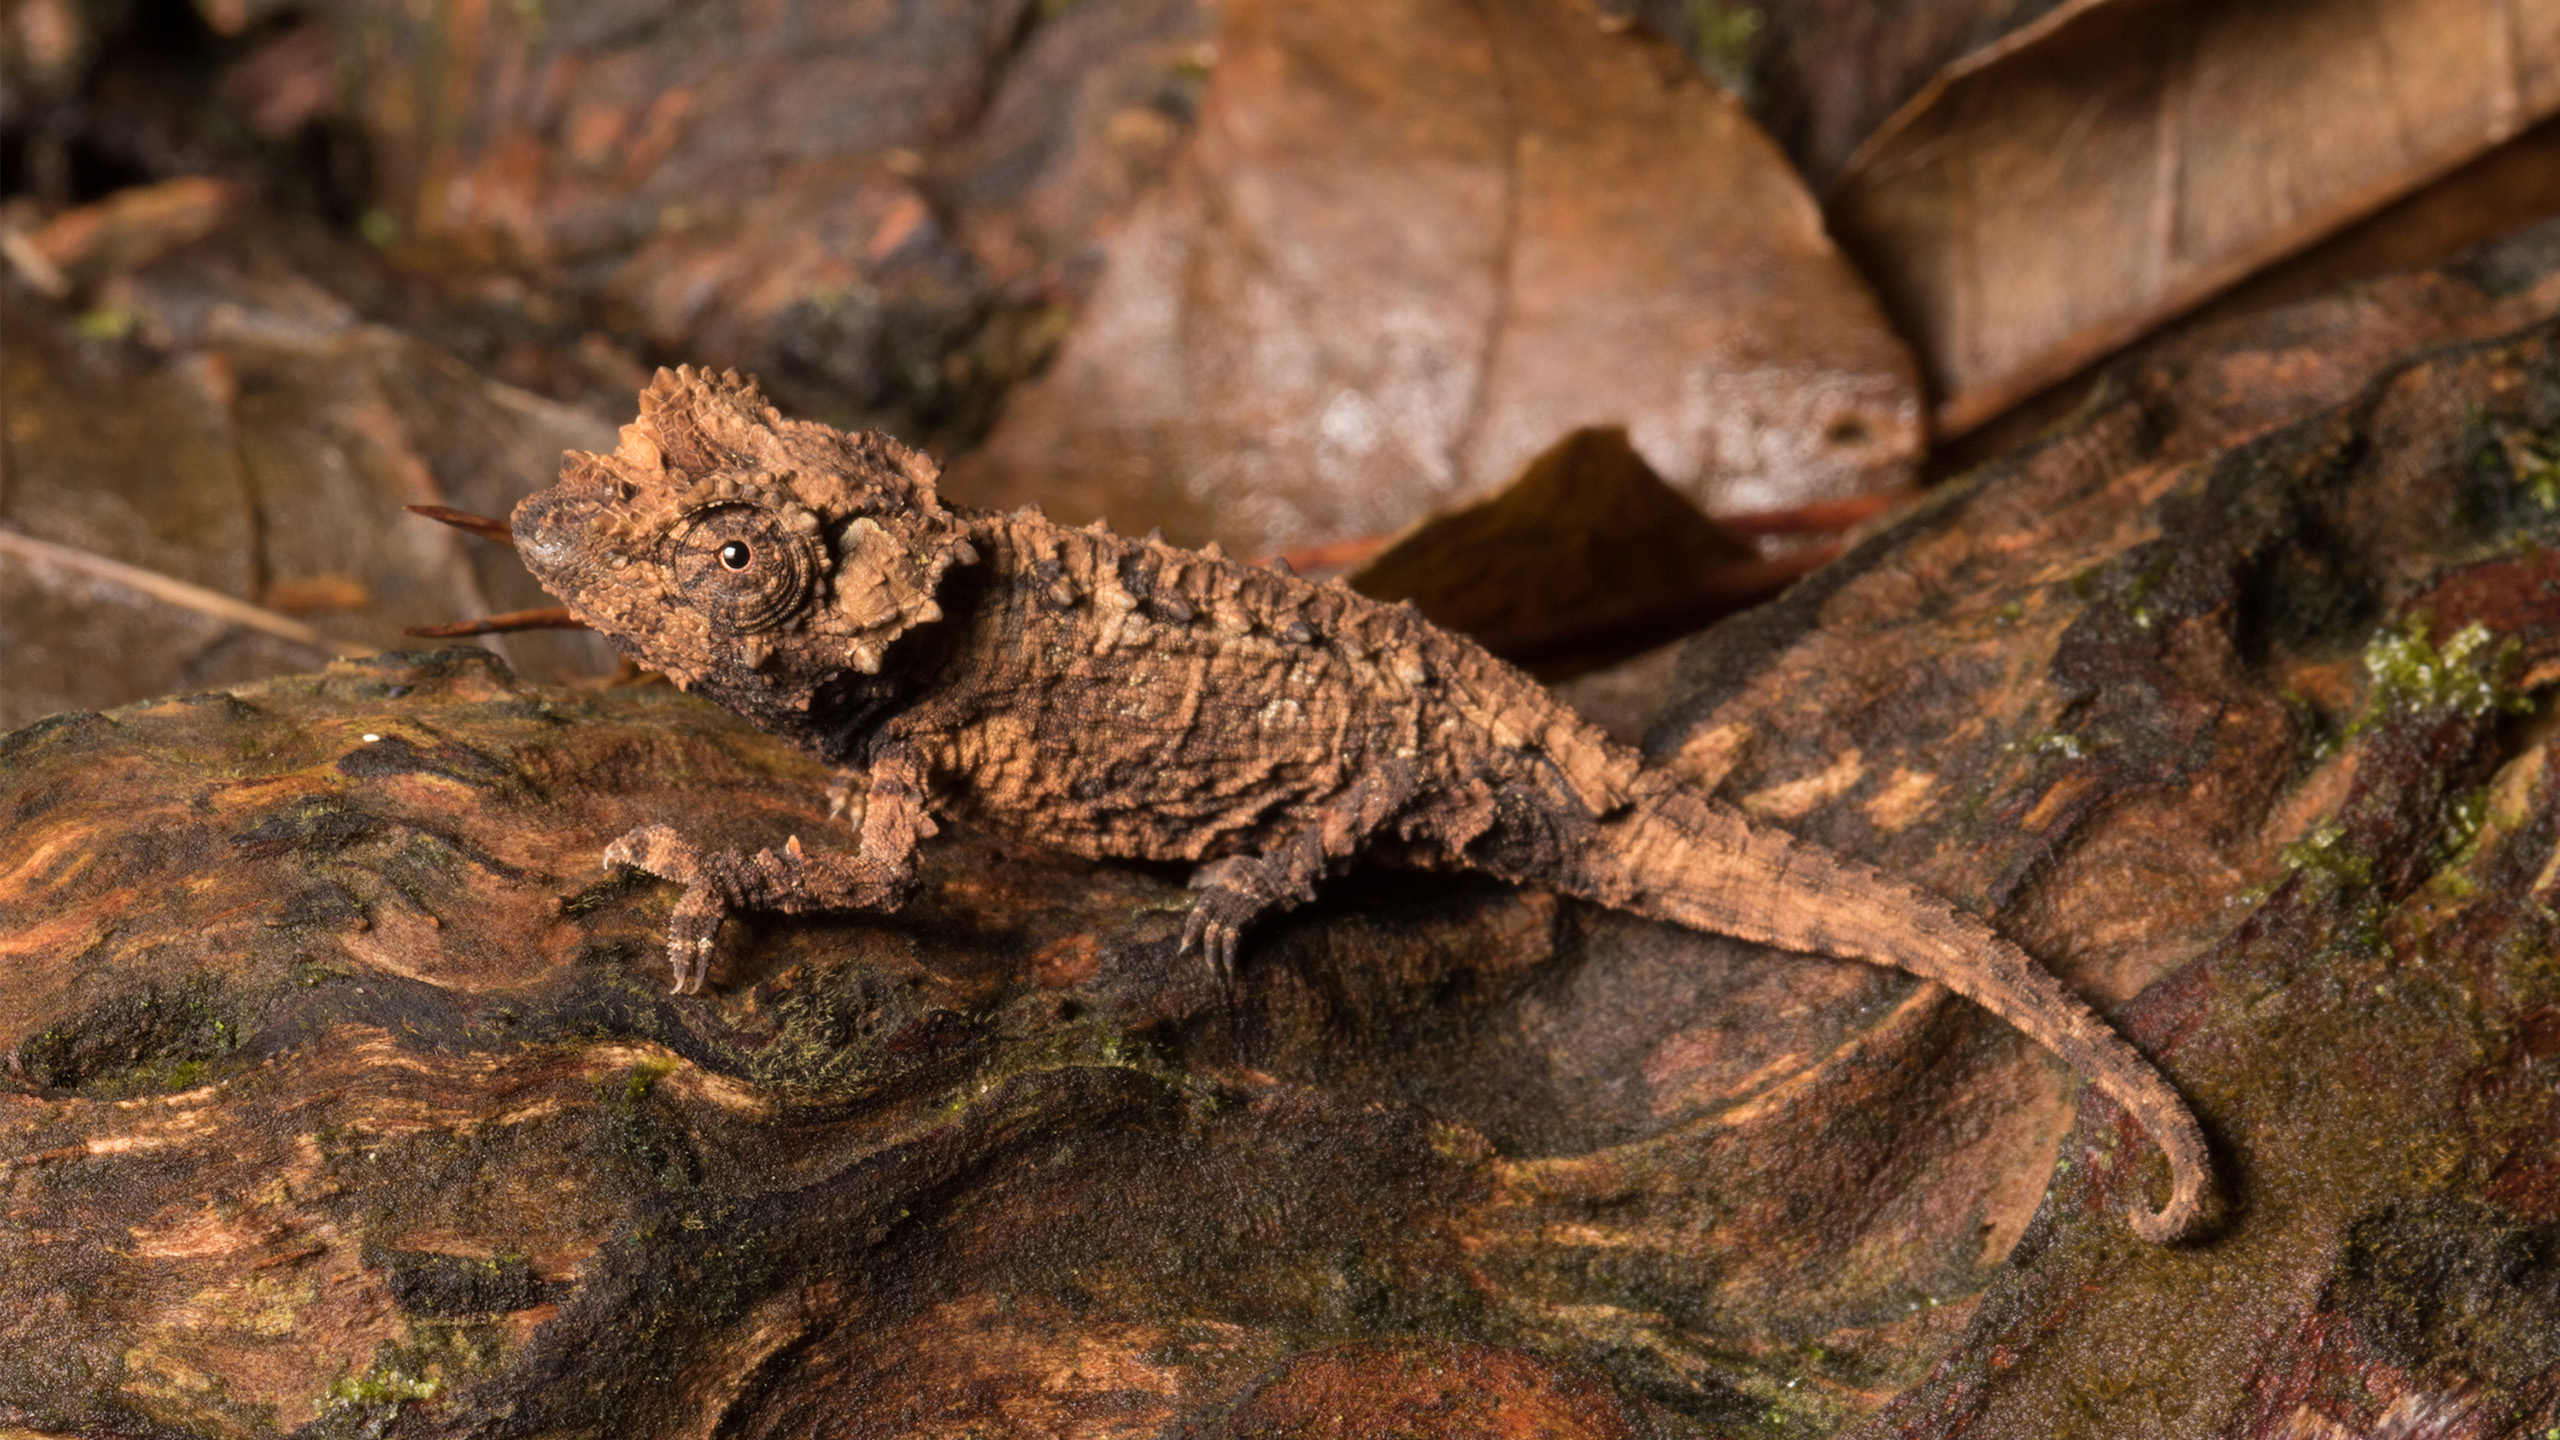 The chameleon Brookesia ebenaui lives endemically in northern Madagascar, can change between different earth tones and is endangered. | Dr. Alexandra Laube